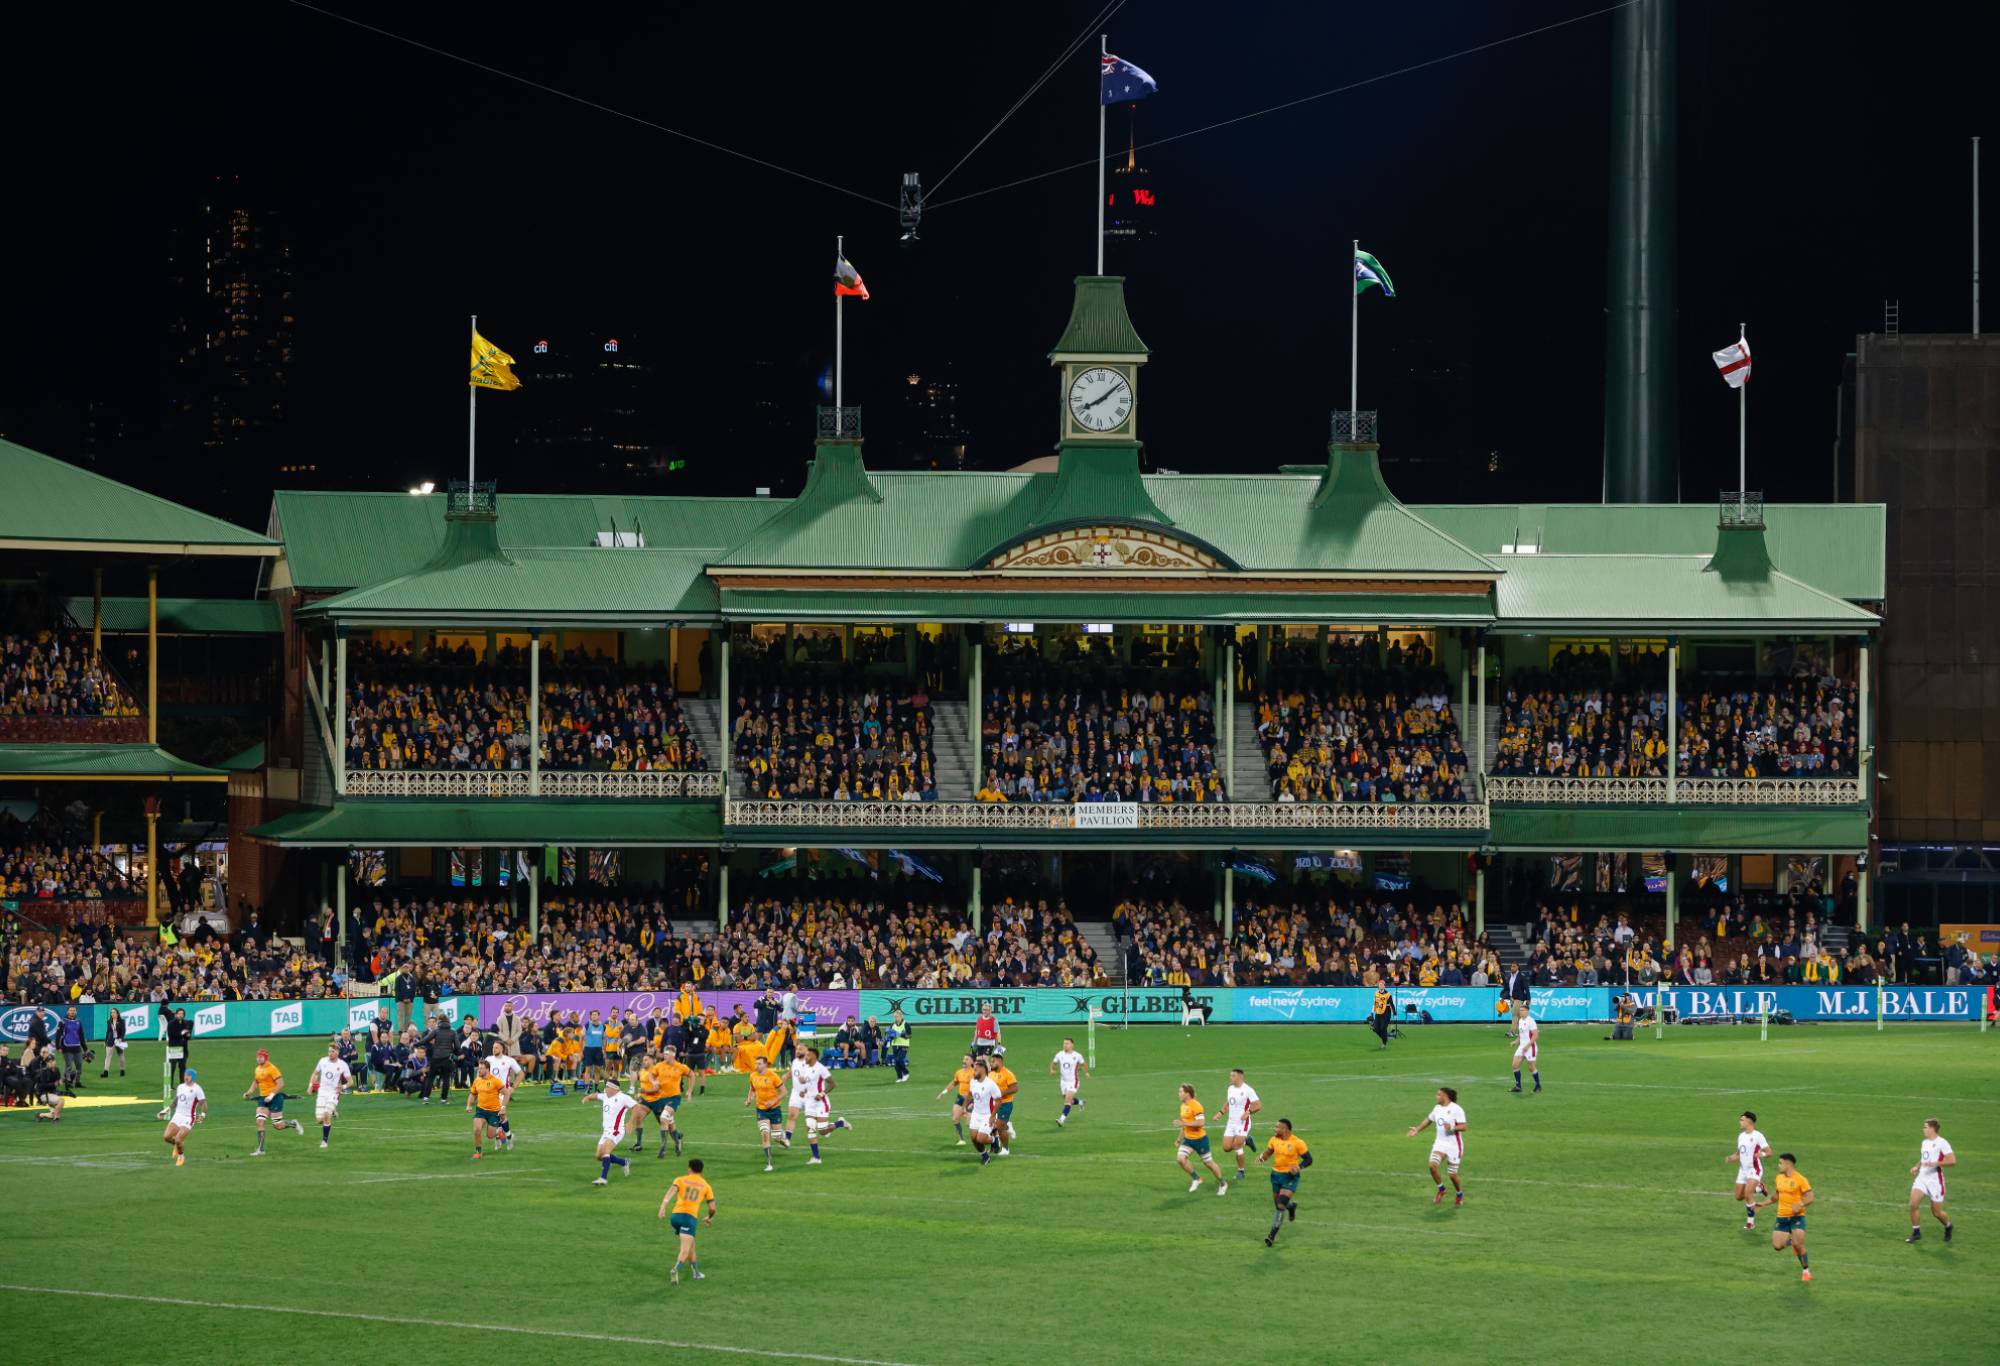 SYDNEY, AUSTRALIA - JULY 16: General view during game three of the International Test match series between the Australia Wallabies and England at the Sydney Cricket Ground on July 16, 2022 in Sydney, Australia. (Photo by Hanna Lassen/Getty Images)